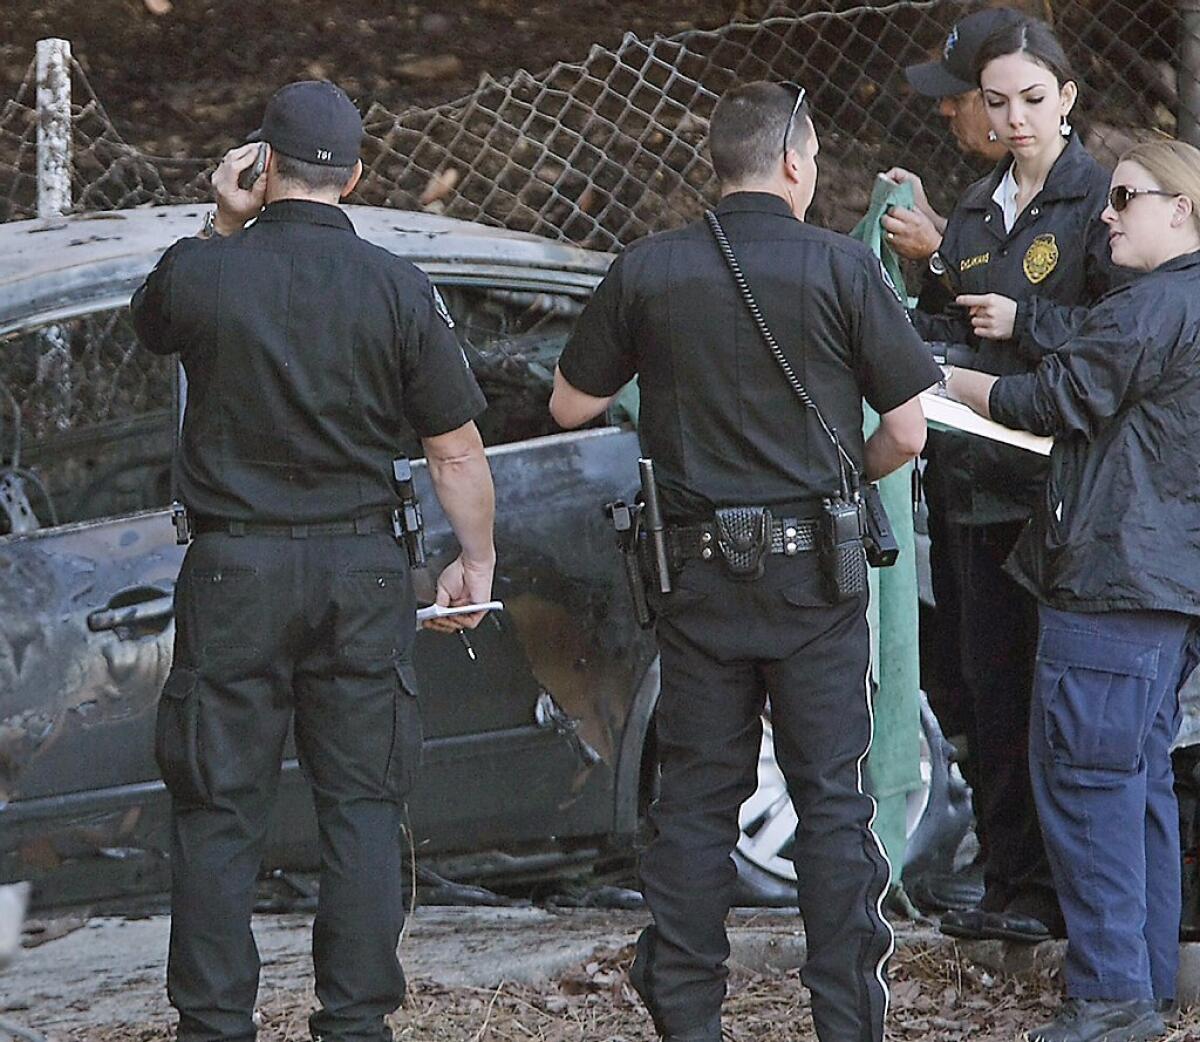 Burbank police investigate the scene of a single-vehicle multiple fatality accident on the southbound 5 freeway at the Scott Road off ramp. The incident was reported early Saturday morning.